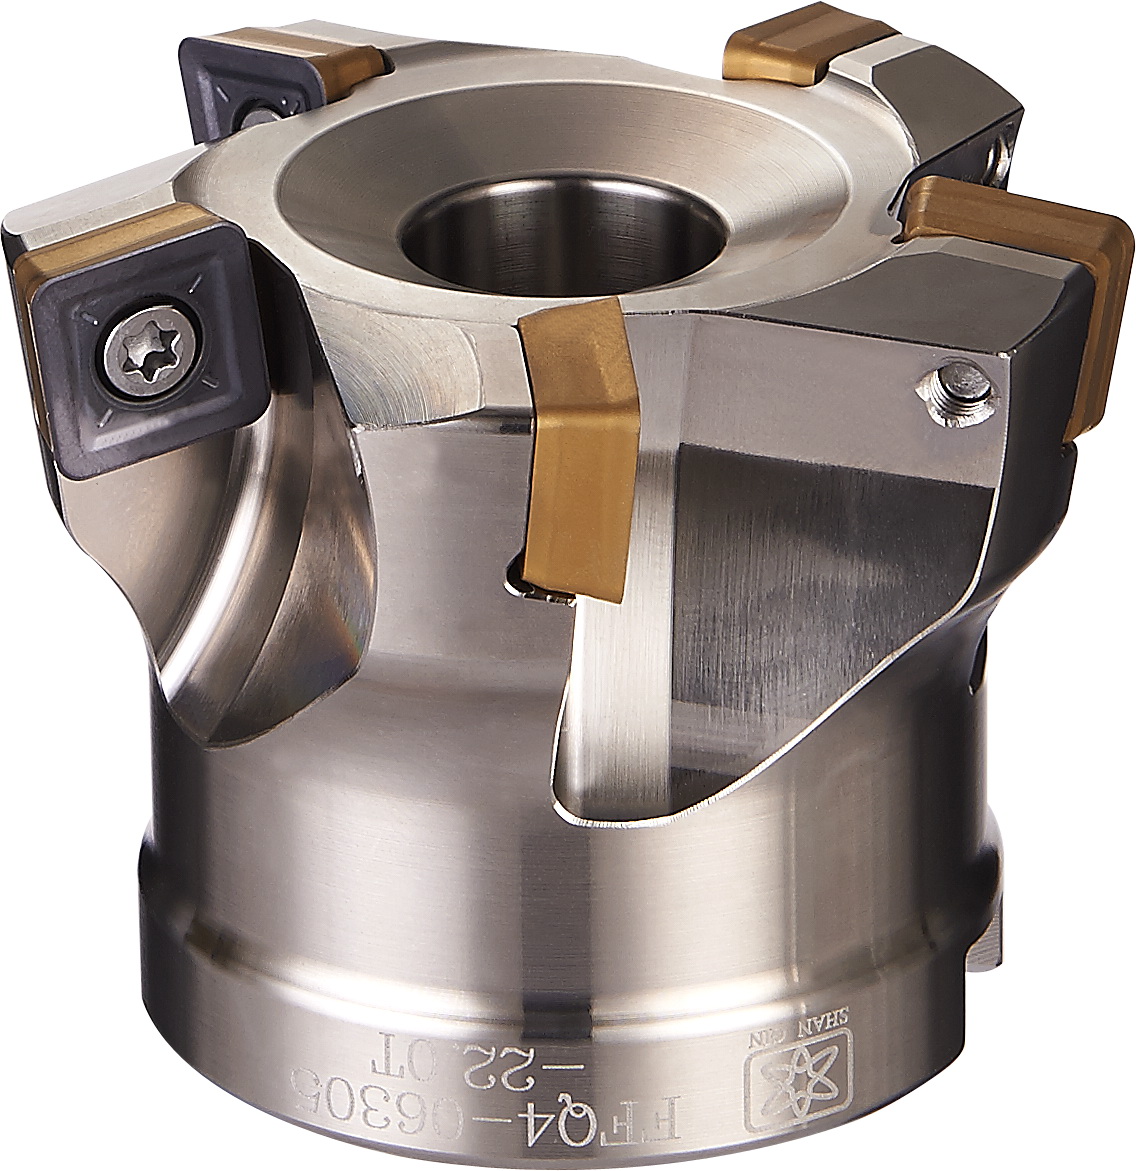 Products|FFQ (SOMT1205) High Feed Milling